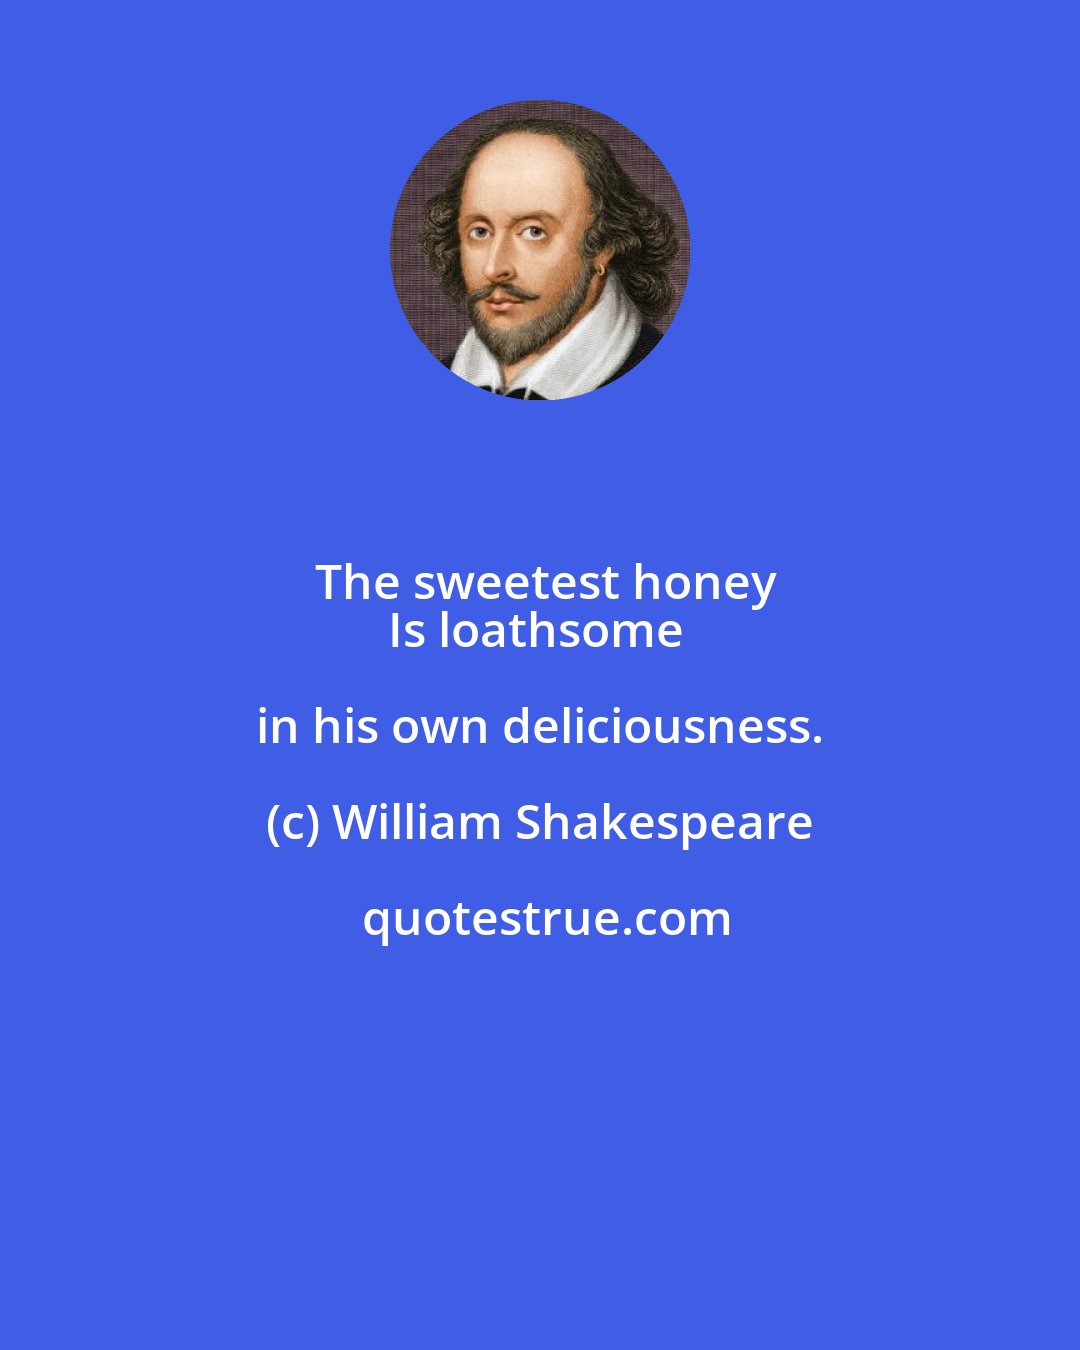 William Shakespeare: The sweetest honey
Is loathsome in his own deliciousness.